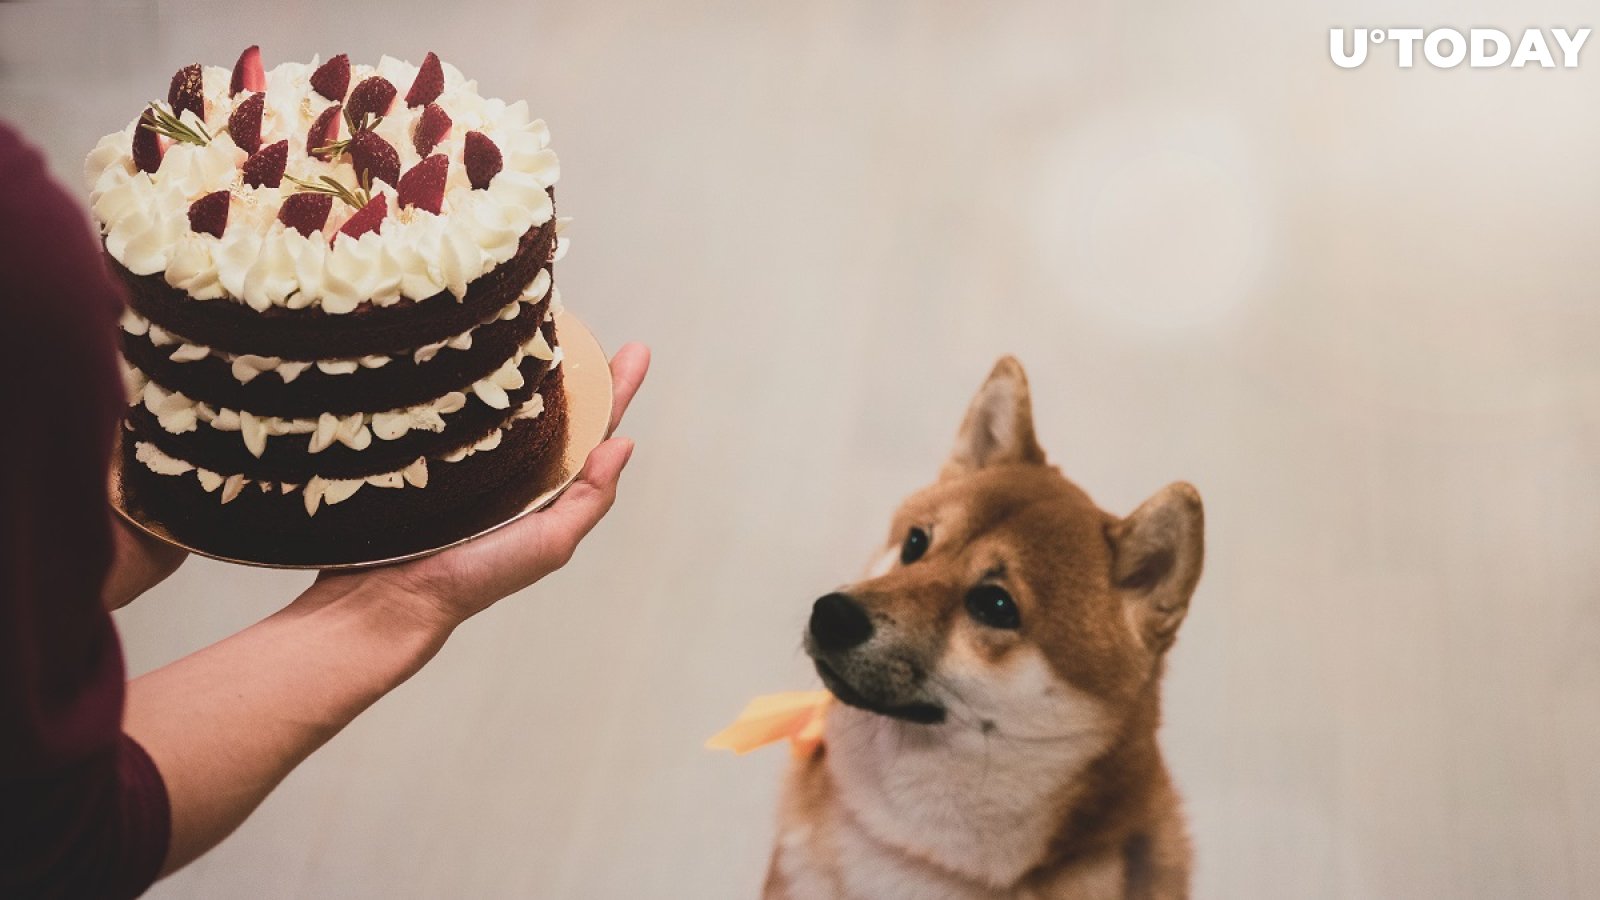 Dogecoin, Elon Musk’s Favorite Cryptocurrency, Turns 8. Here’s How It Has Performed This Year